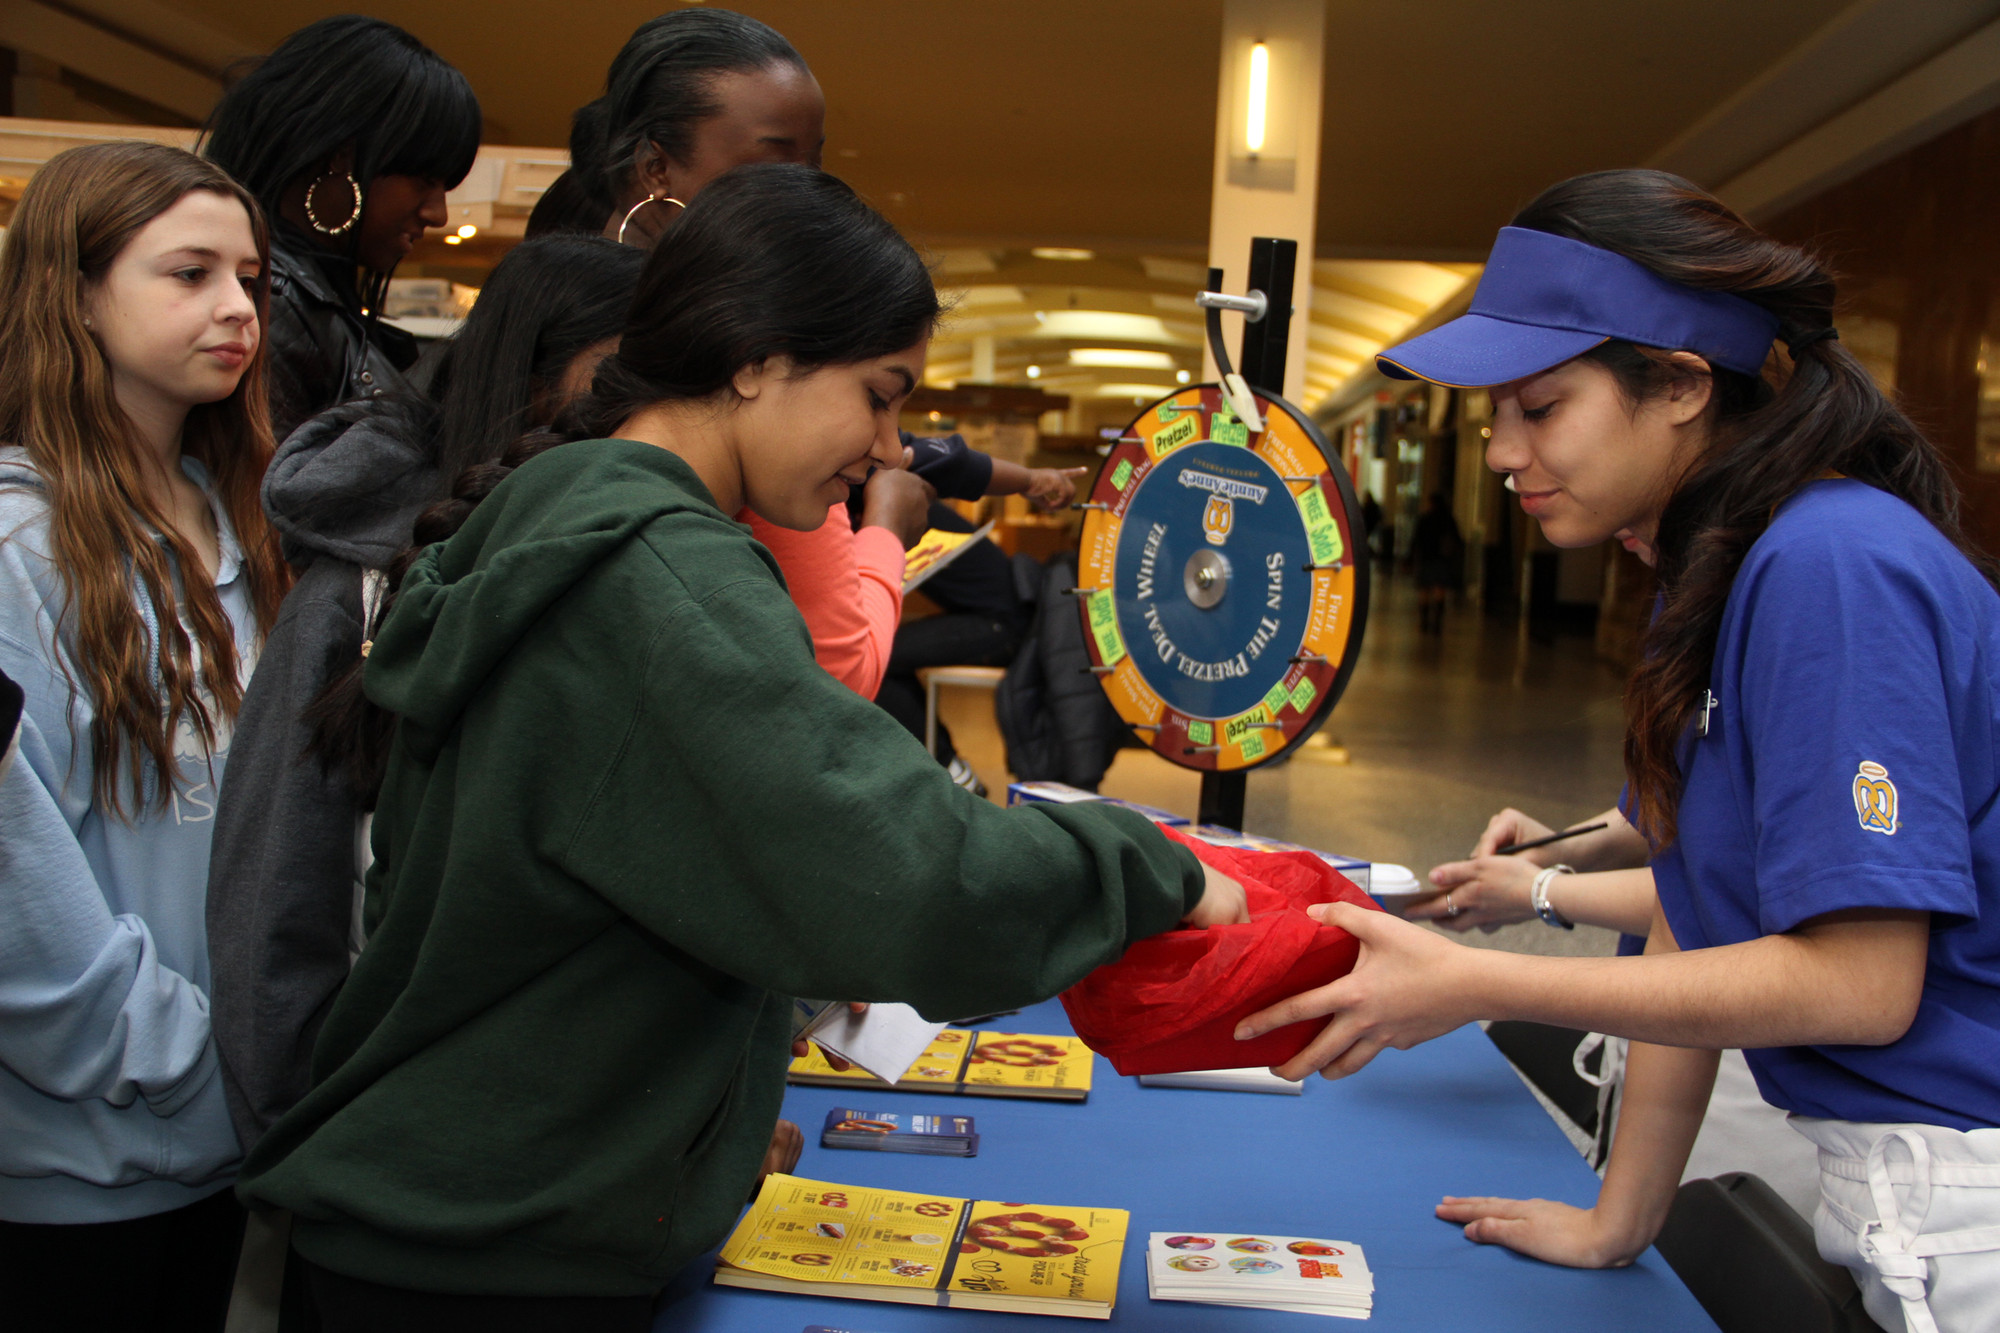 Student Arham Ansari draws for a spin on the “Auntie Anne’s” prize wheel.